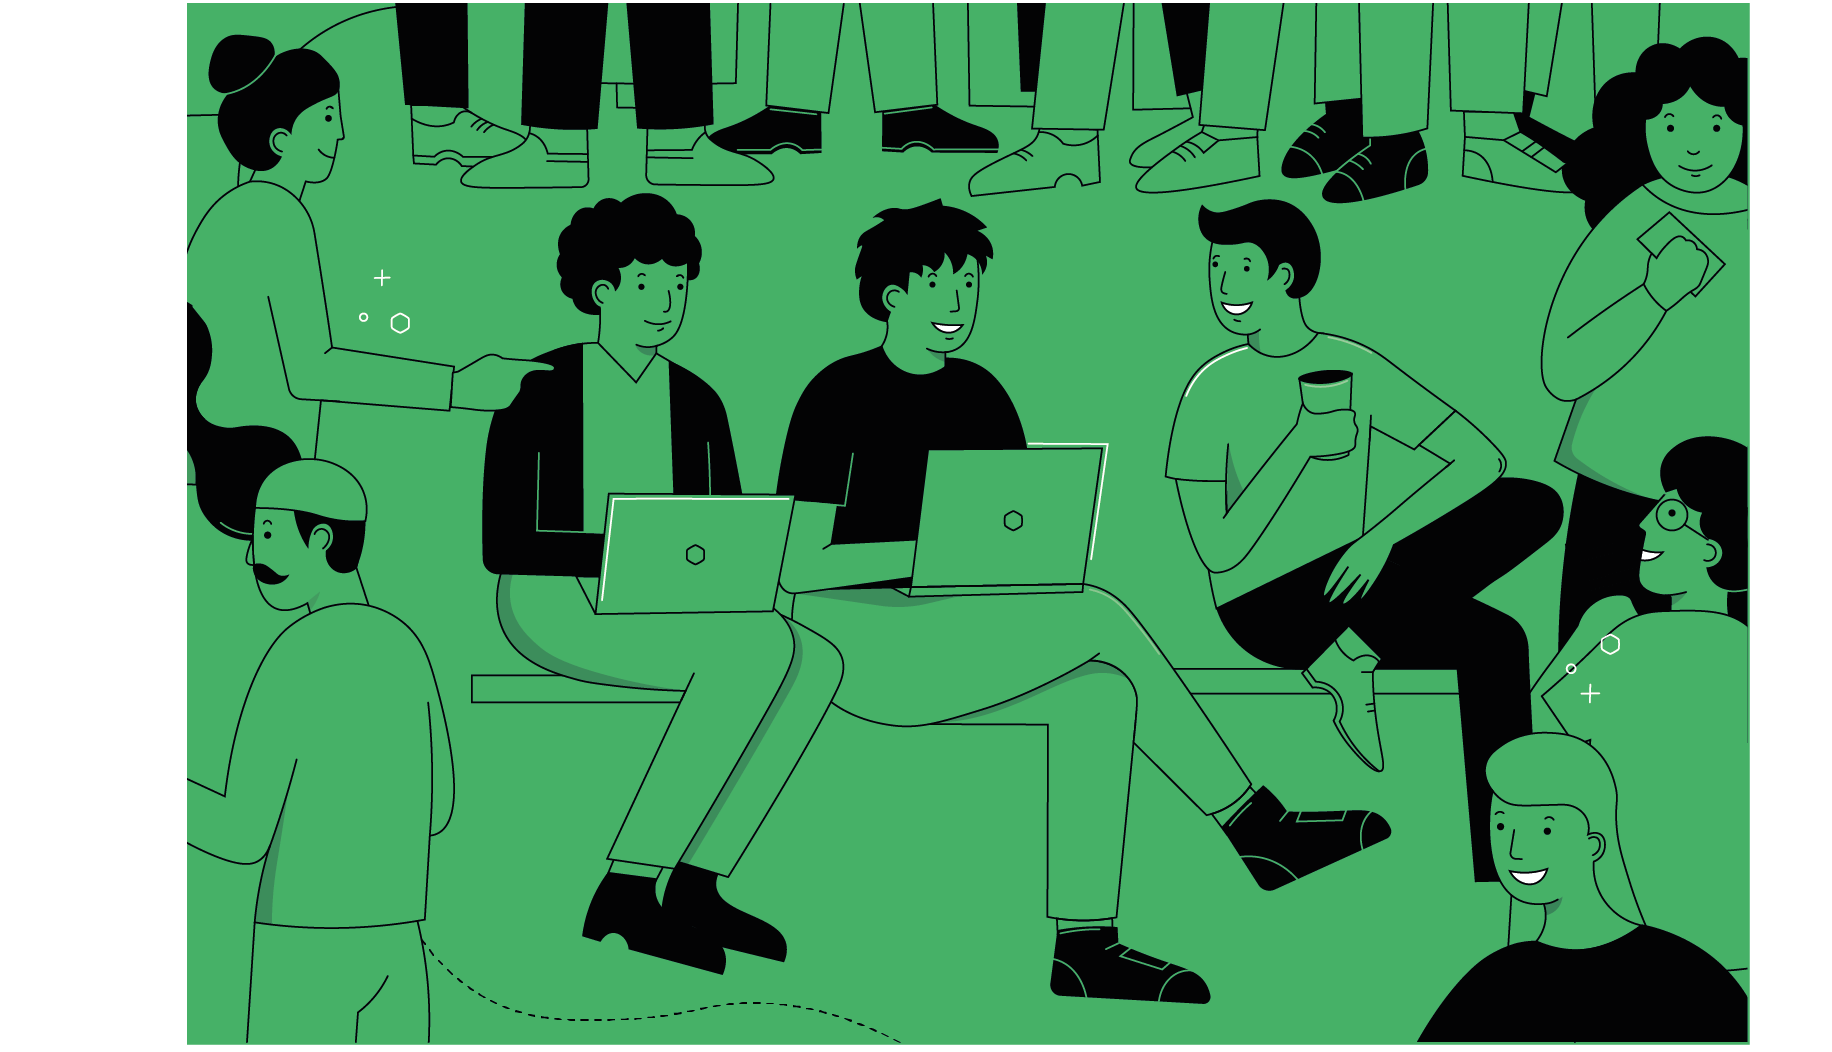 Illustration of three people on a bench out of which two are working on their laptops, with a bunch of people surrounding them